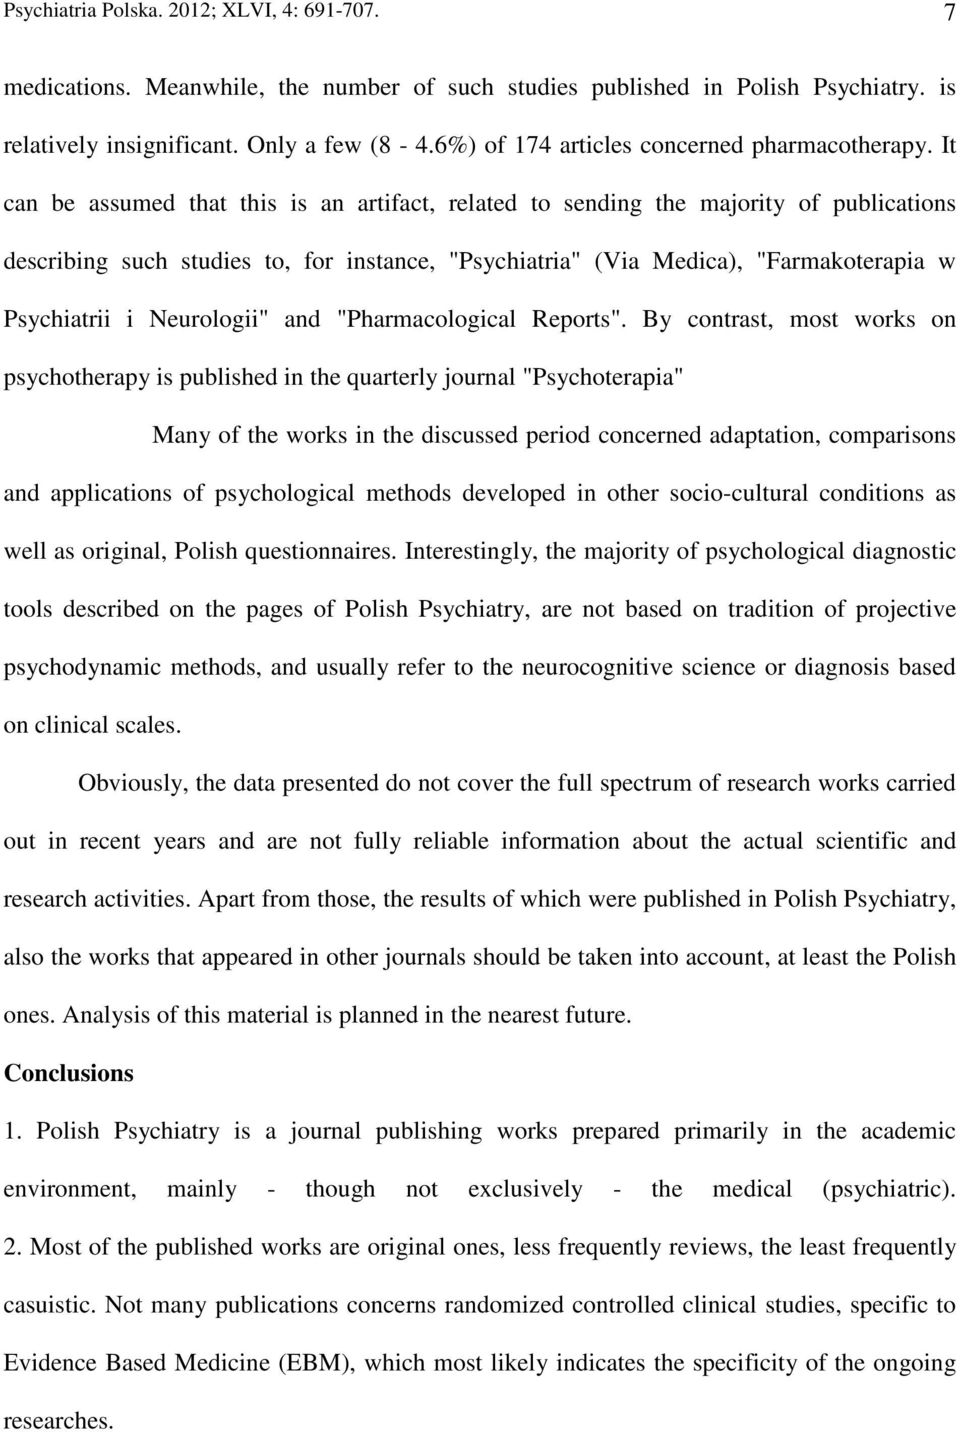 It can be assumed that this is an artifact, related to sending the majority of publications describing such studies to, for instance, "Psychiatria" (Via Medica), "Farmakoterapia w Psychiatrii i